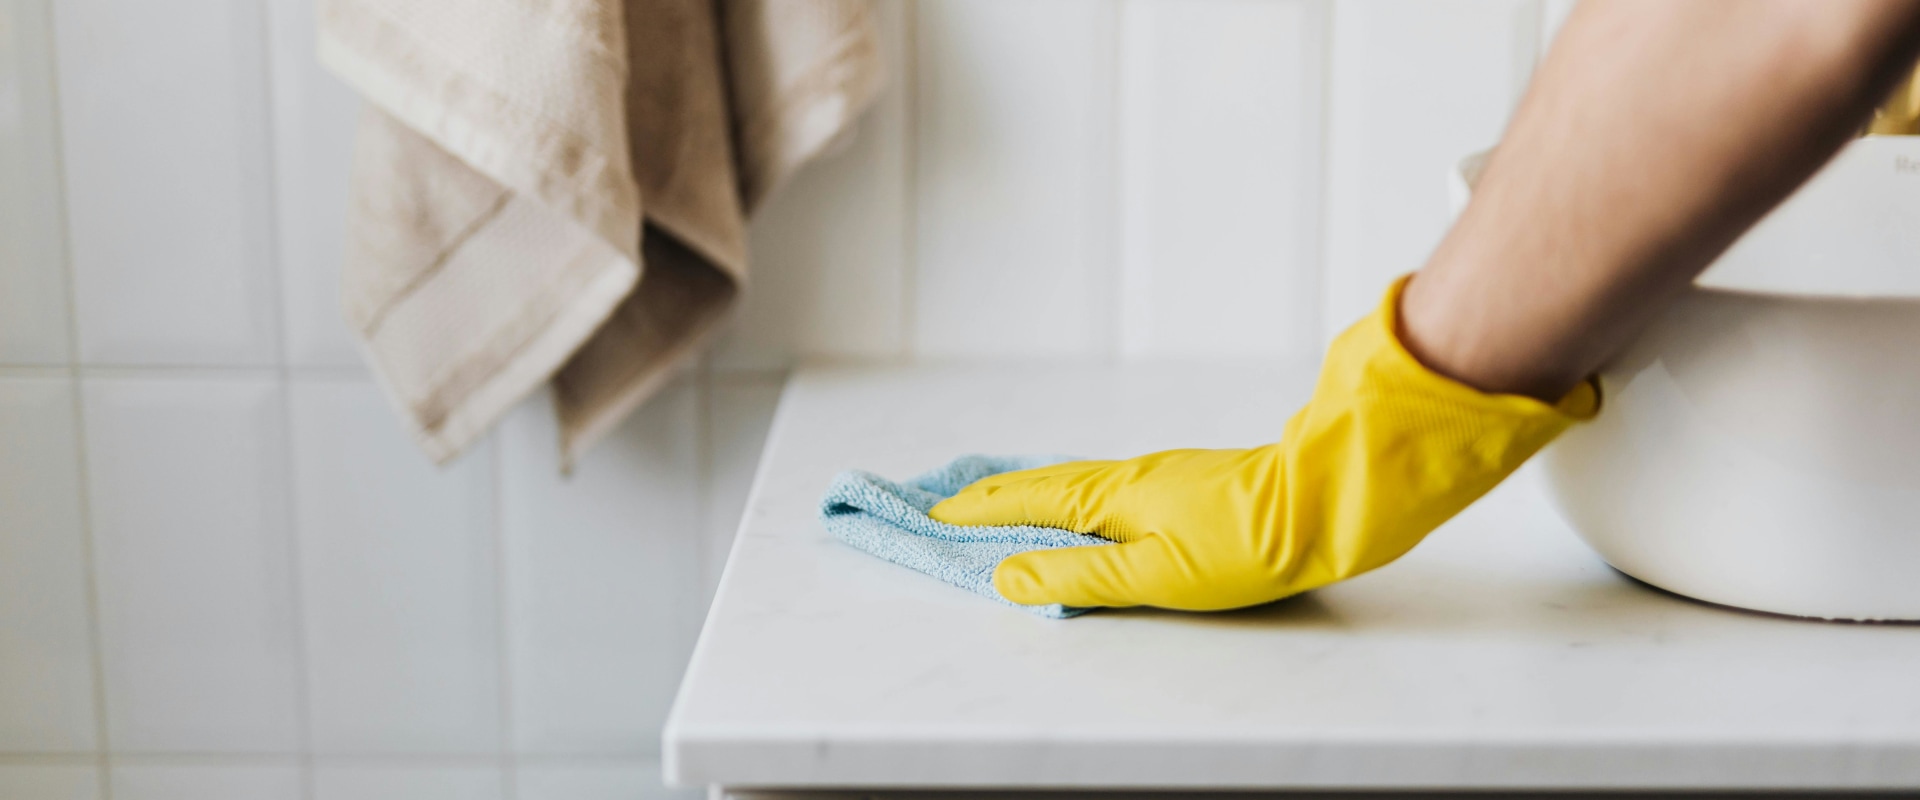 From Dust To Shine: Maximizing Your Renovation Efforts With A Maid Service In Las Vegas